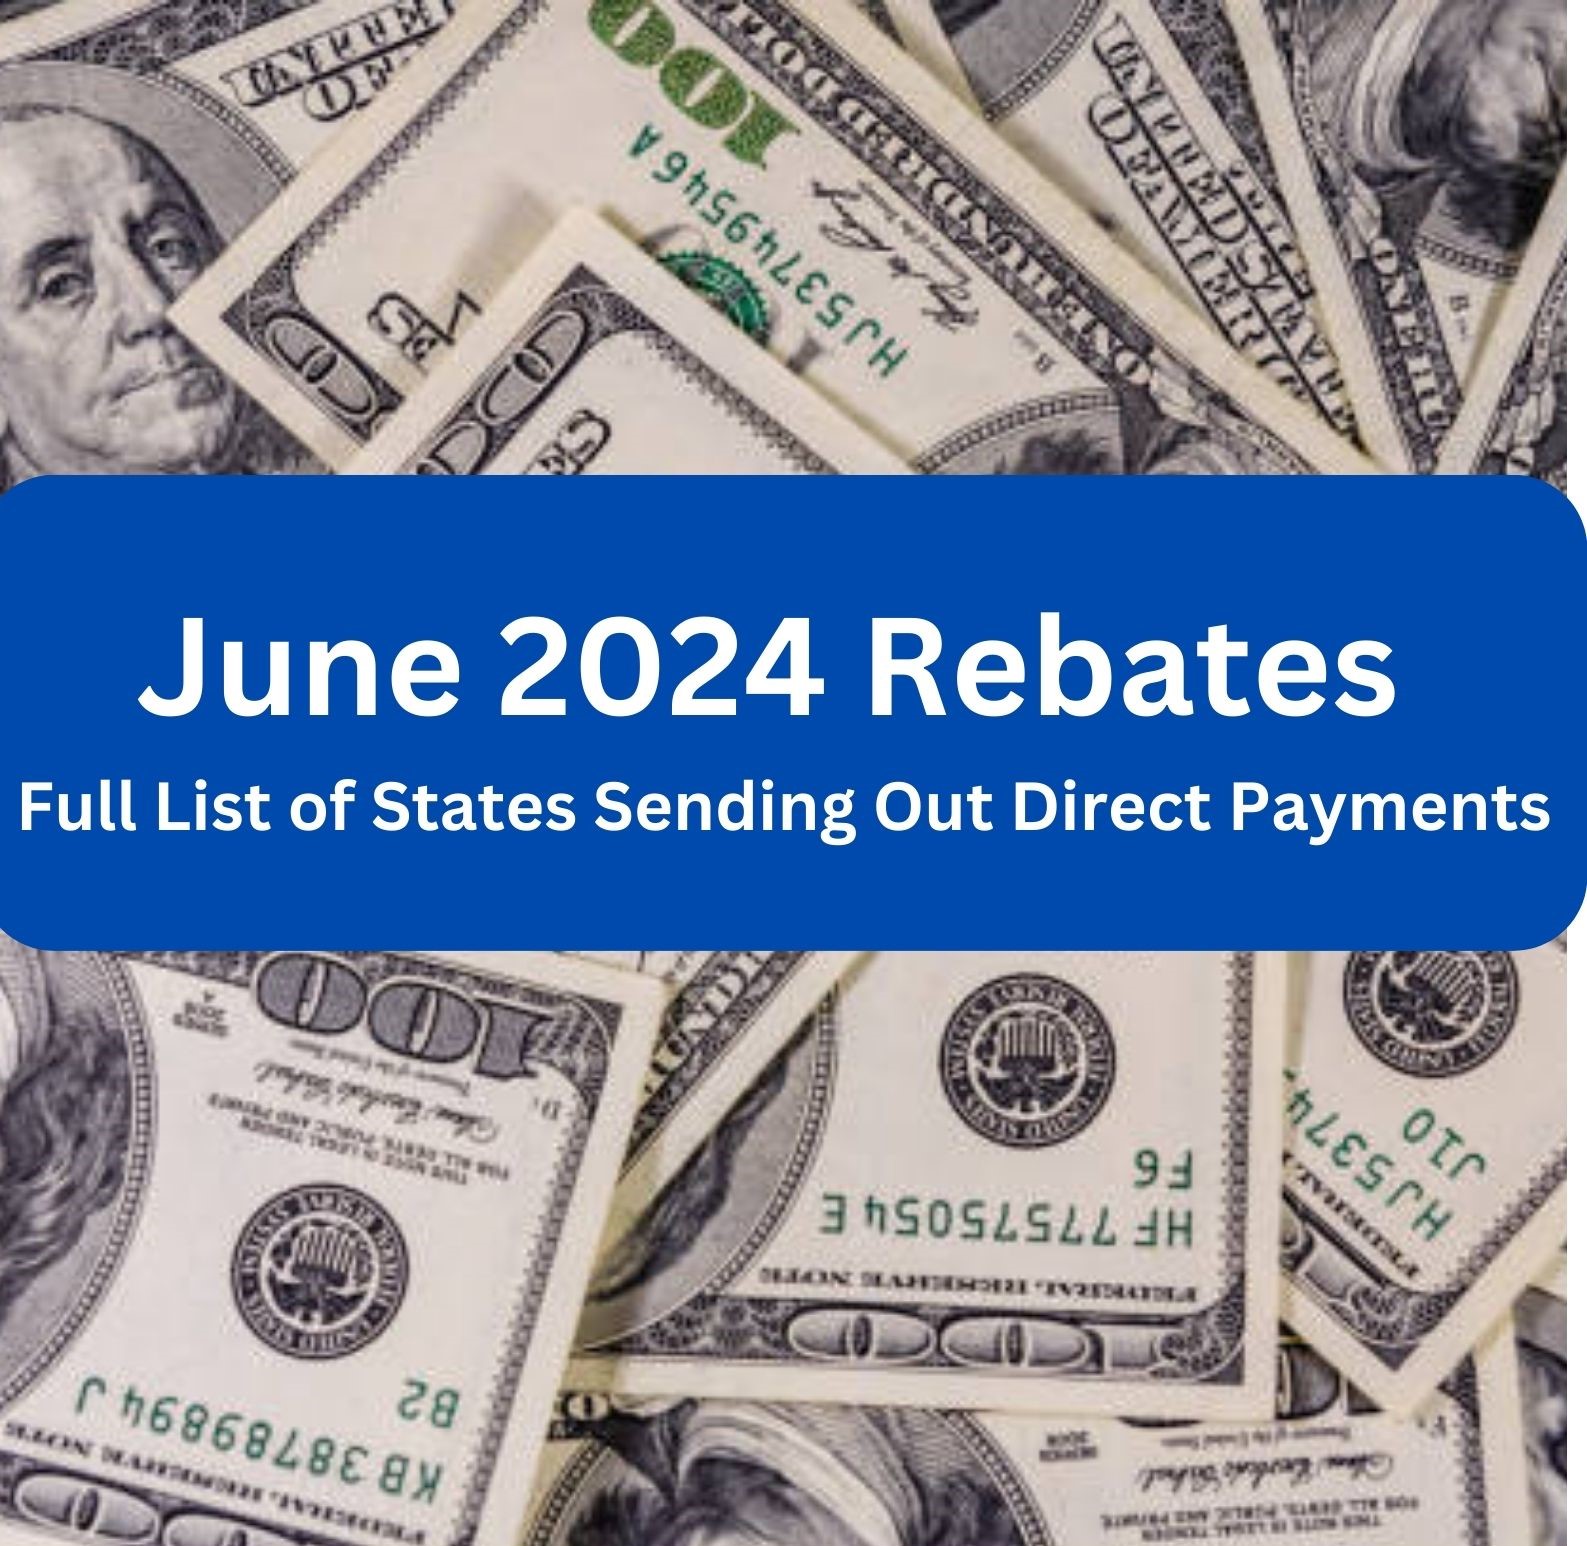 June 2024 Rebates: Full List of States Sending Out Direct Payments